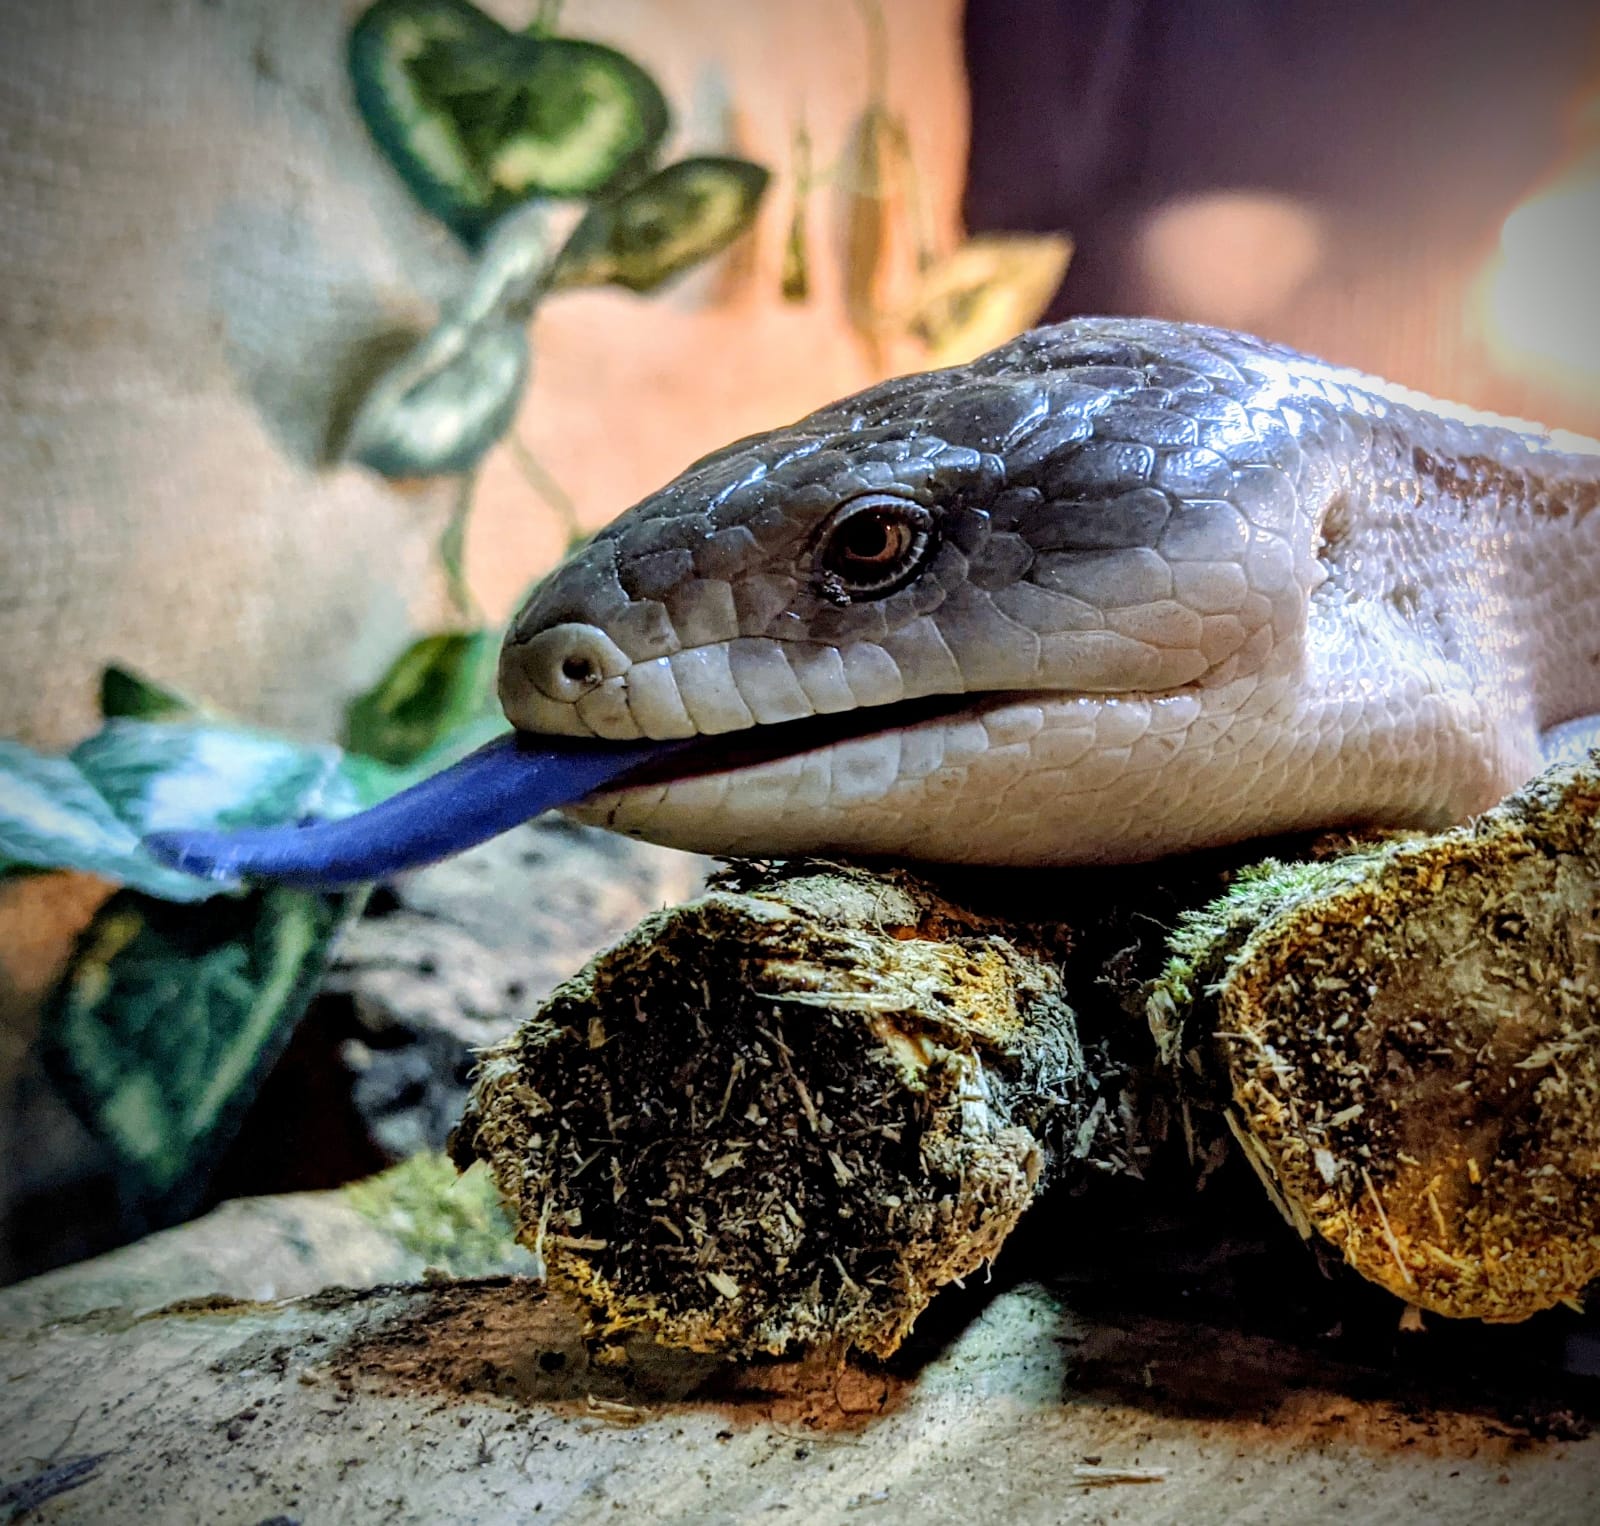 blue tongued reptile